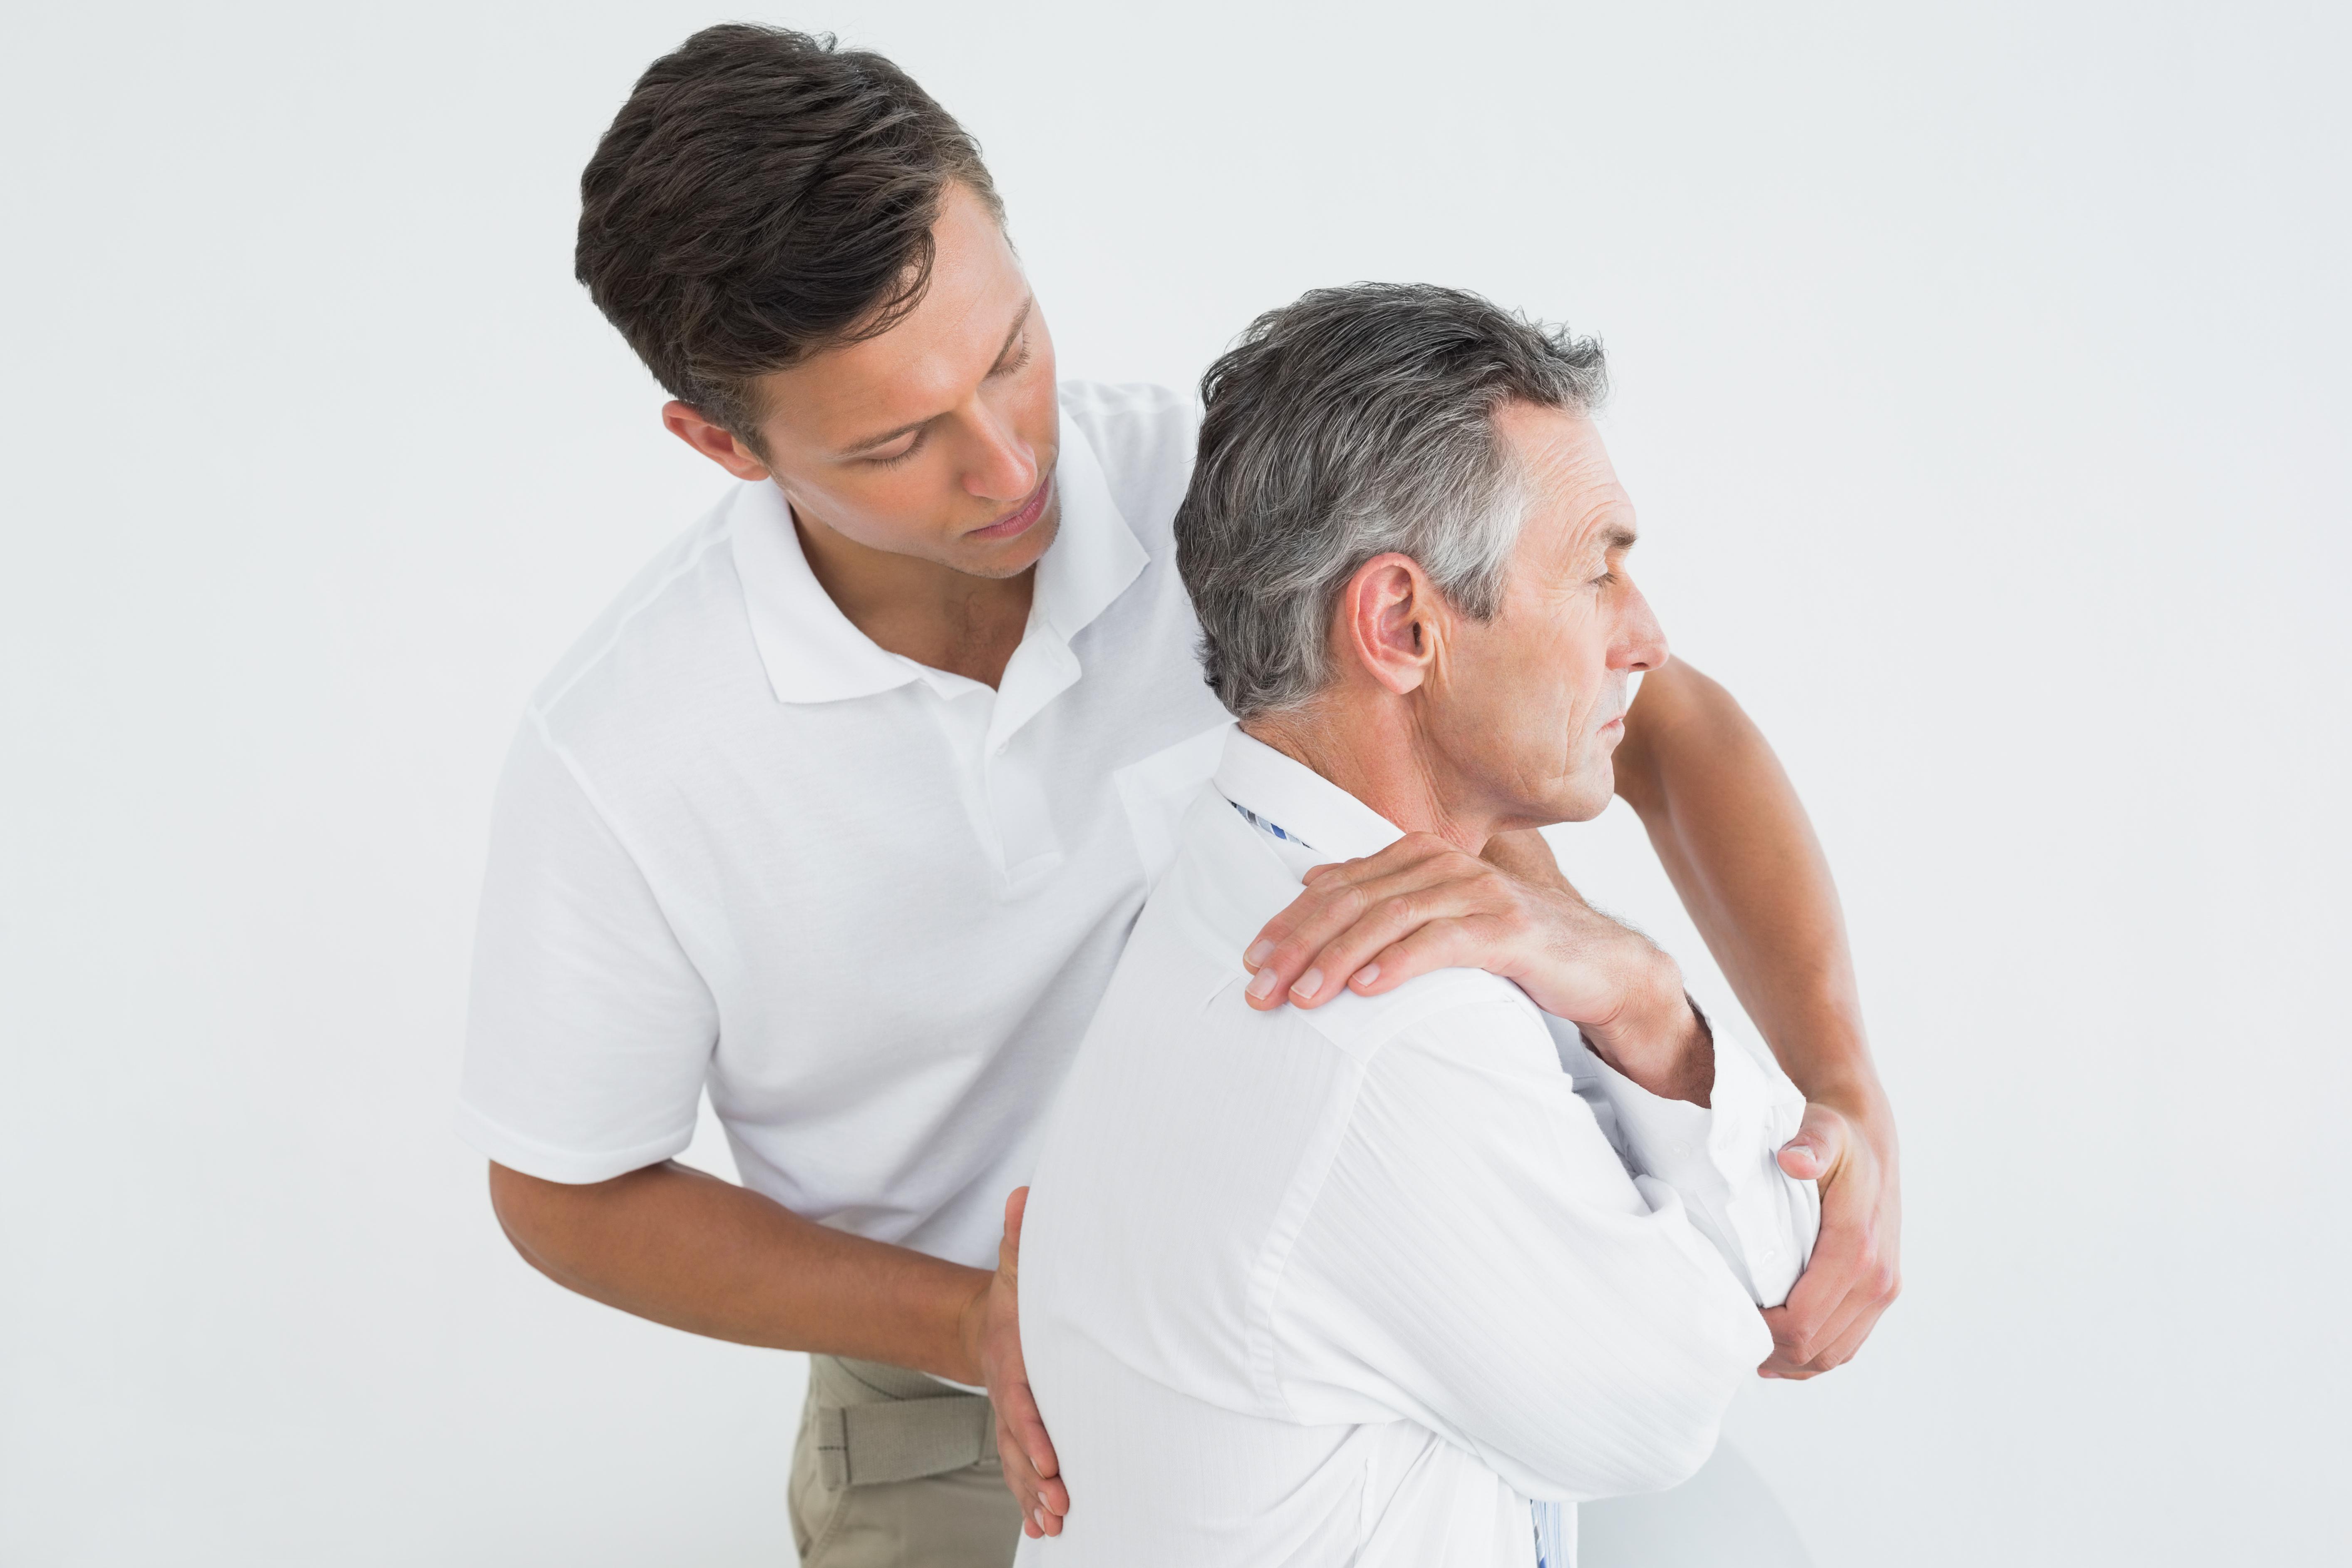 Blog  Back Pain Relief With Physical Therapy